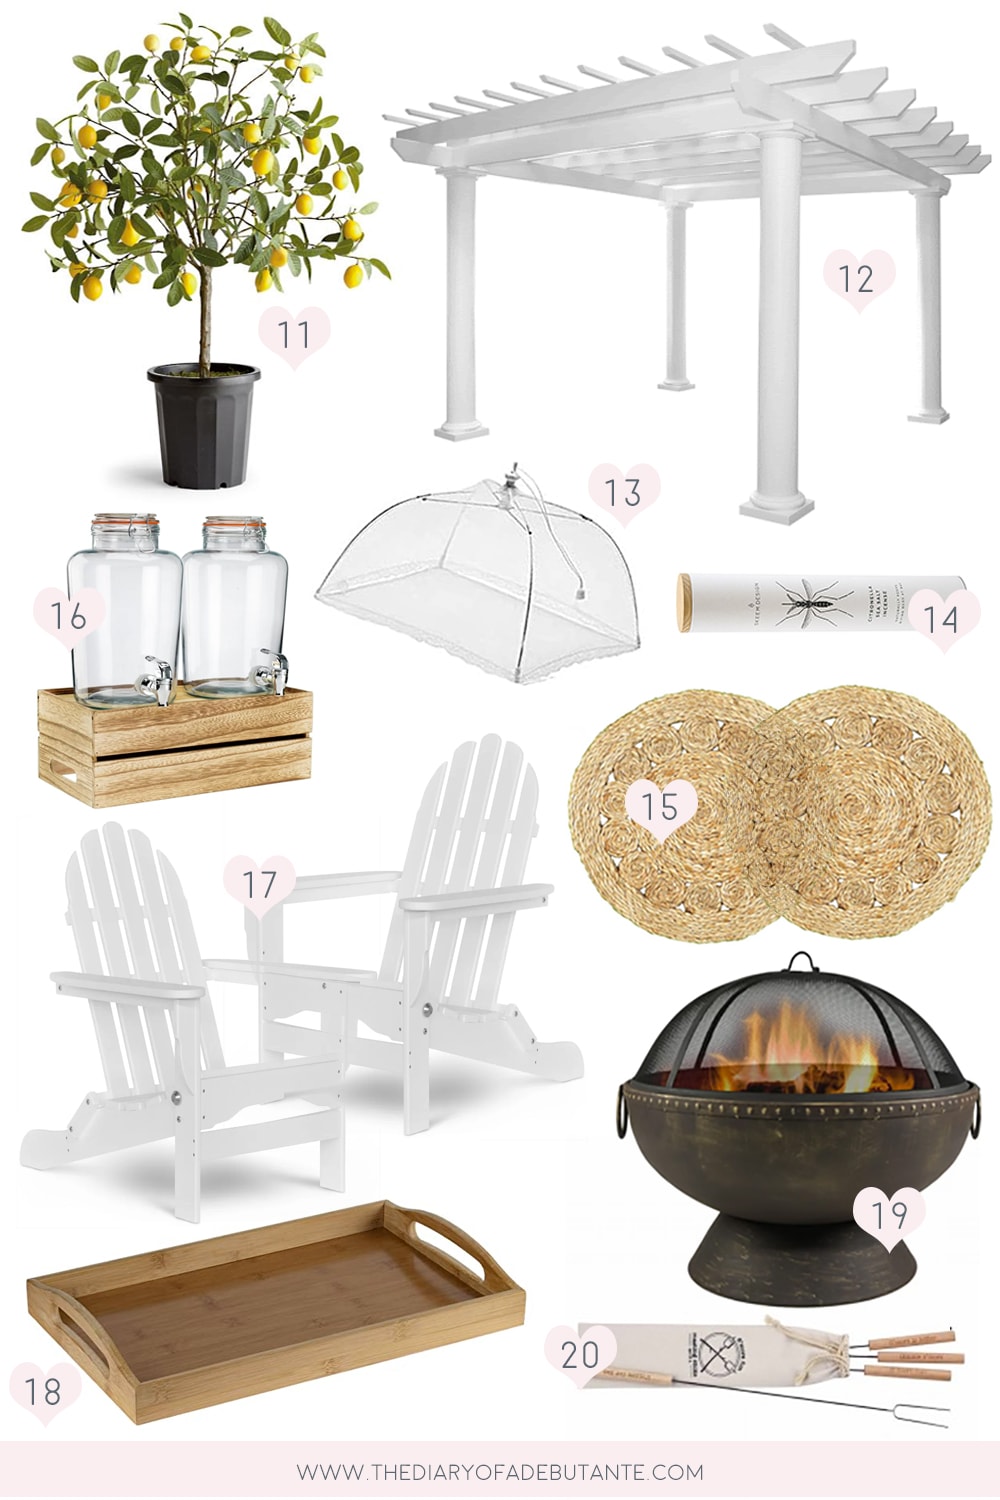 Entertaining blogger Stephanie Ziajka rounds up her top outdoor entertaining essentials for summer on Diary of a Debutante